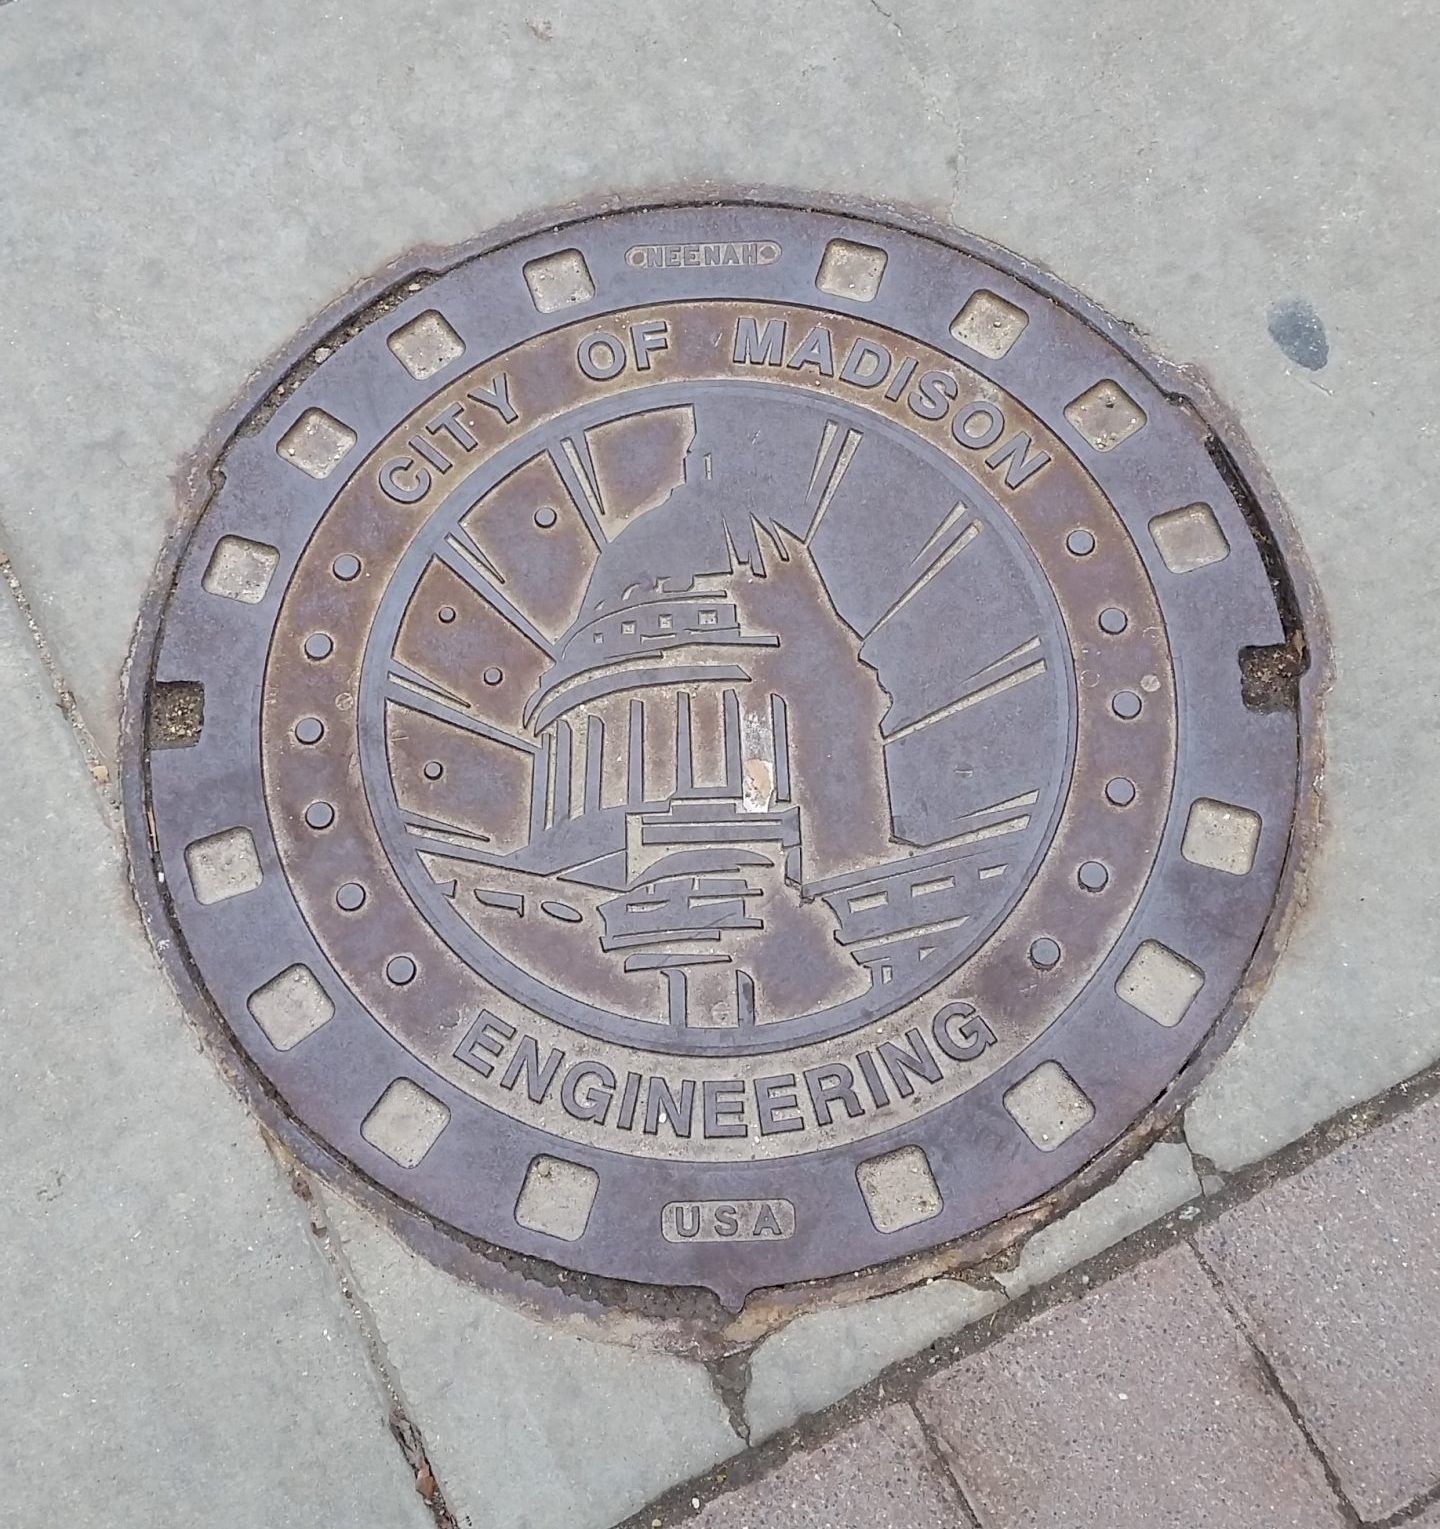 Read more about the article OBJECT HISTORY: Neenah Foundry Manhole Cover